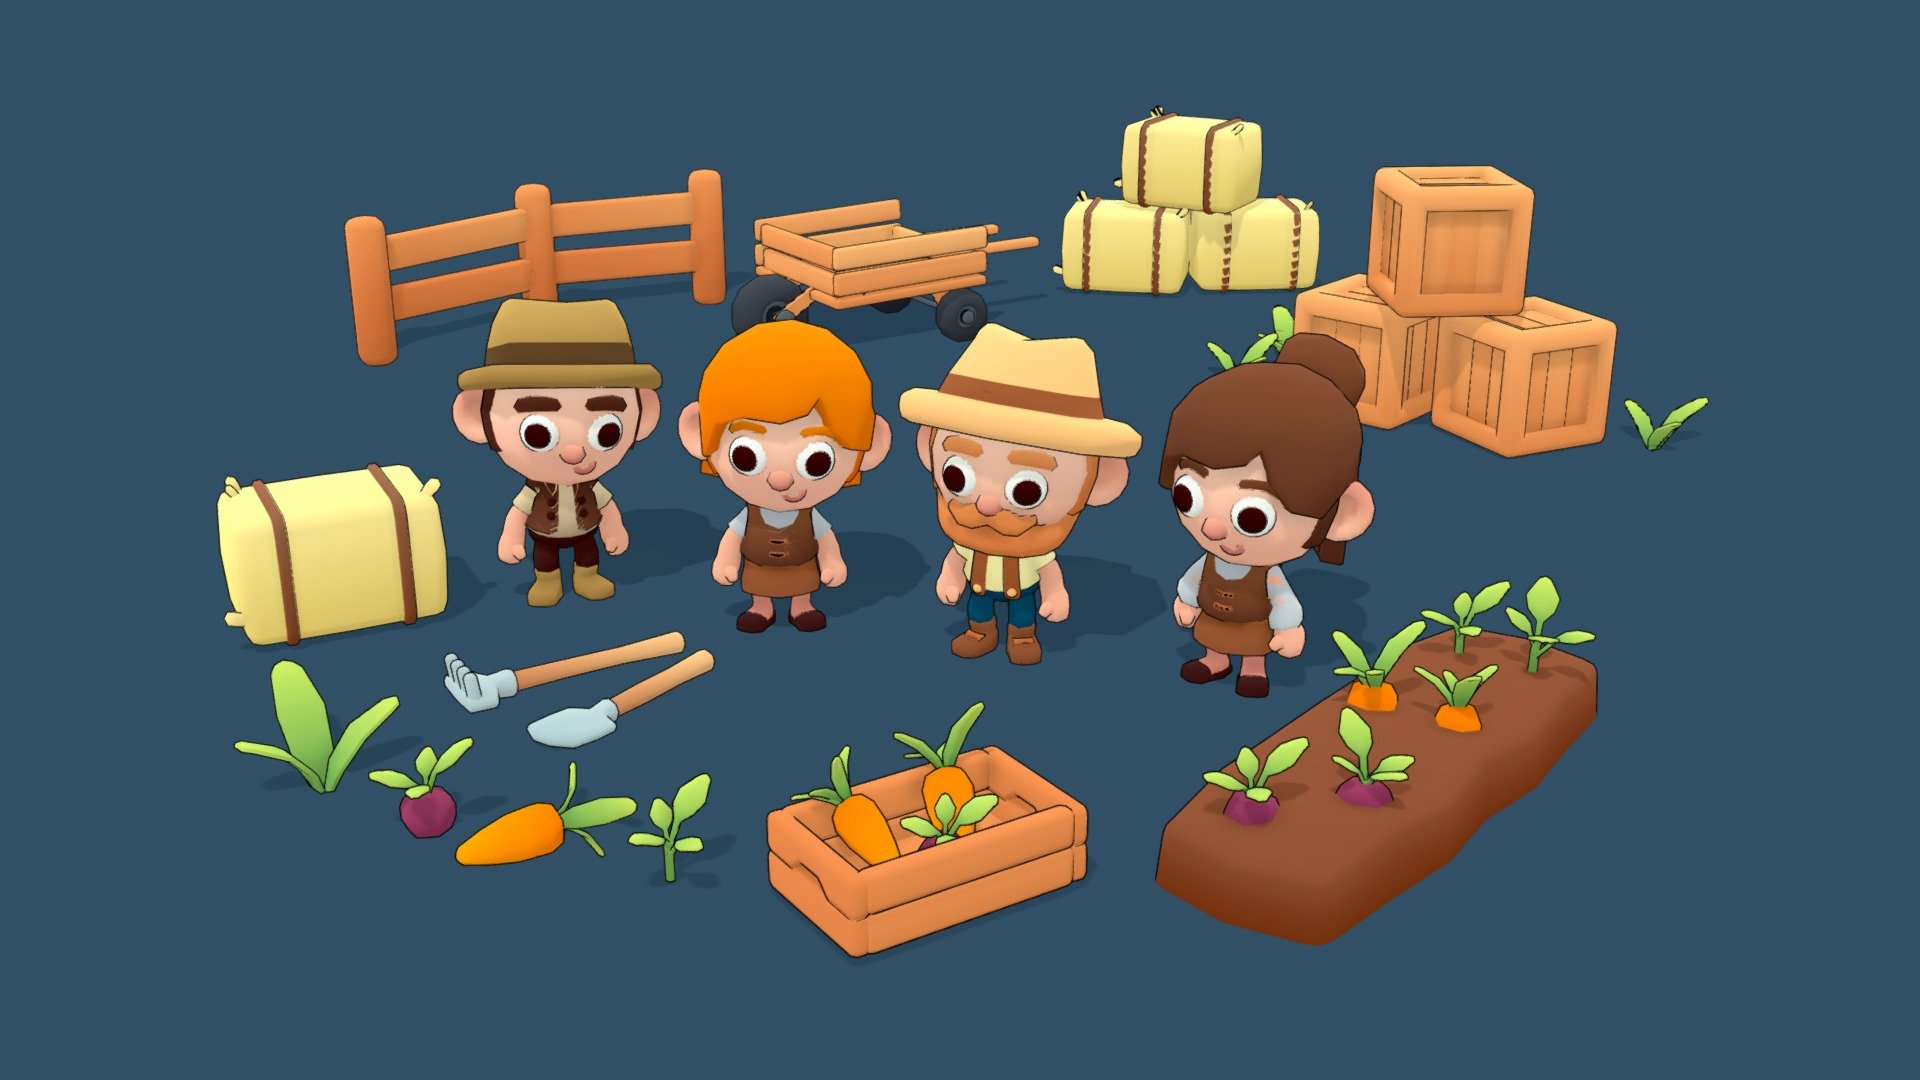 Lowpoly modular characters and props for game development.

Available on Unity Asset Store

*Check the aditional zipped file when buying this pack to access the rigged character, props and textures.



-Rigged/Skinned

-Mecanim Ready

-Texture: 256px Diffuse





-Polycount:



Characters:

Puppet Farmer Man | 4.7k Tris

Puppet Farmer Old Man | 4.9k Tris

Puppet Farmer Woman | 5k Tris

Puppet Farmer Girl | 4.8k Tris



Props:

Crate | 2.2k Tris

Wooden Box | 1.3k Tris

Cart | 3k Tris

Grass | 168 Tris

Rail 00 | 472 Tris

Rail 01 | 344 Tris

Hay | 600 Tris

Grow Line | 160 Tris

Beet | 340 Tris

Carrot | 316 Tris

Sprou74 | 284 Tris

Rake | 410 Tris

Shovel | 238 Tris




Animations:

Idle

Walk

Run

Jump




Blendshapes

Eyebrows:

Up

Down

Angry

Sad




Mouth:

Neutral

Sad

Curious - Puppet Farmers Asset Pack - Buy Royalty Free 3D model by joaobaltieri 3d model